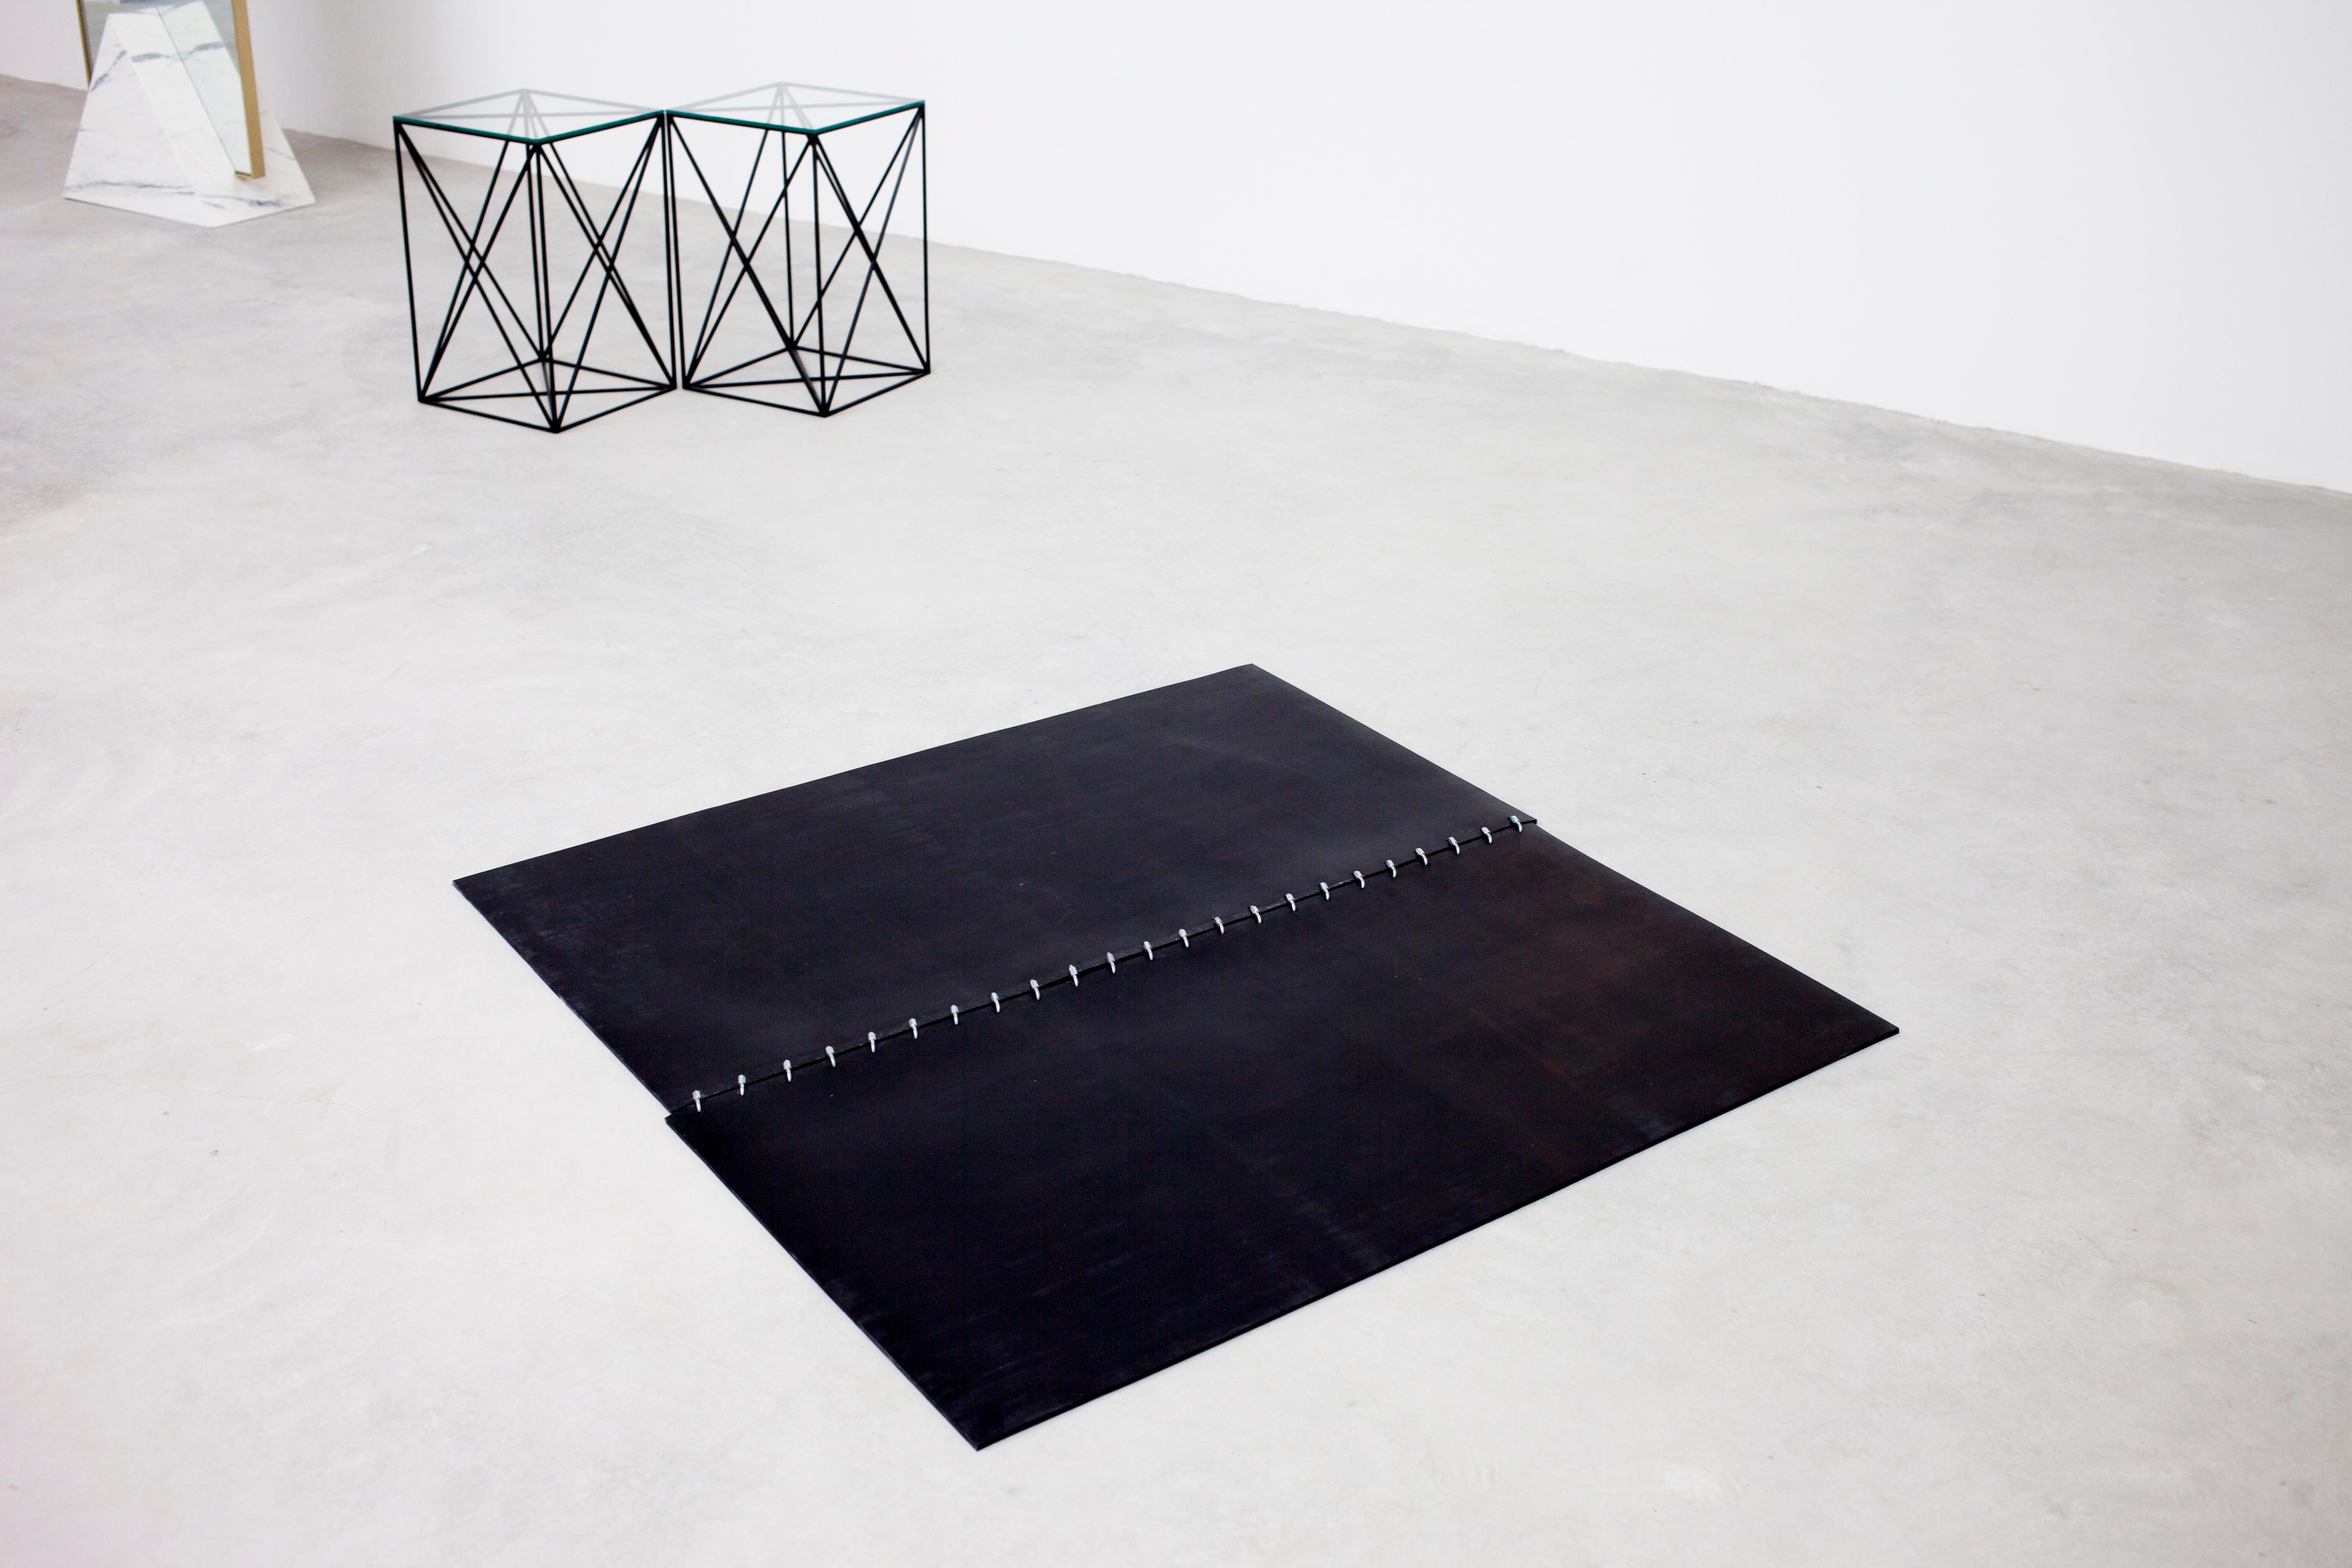 Material Lust [American, b.1981,1986]
Okipa Rug, 2017 
Shown in black rubber and stainless steel 
Measures: 4' W x 4' L 
The piece can be used on the floor or wall. 
One of kind. 
Each piece is handmade by Material Lust in their studio in Soho.